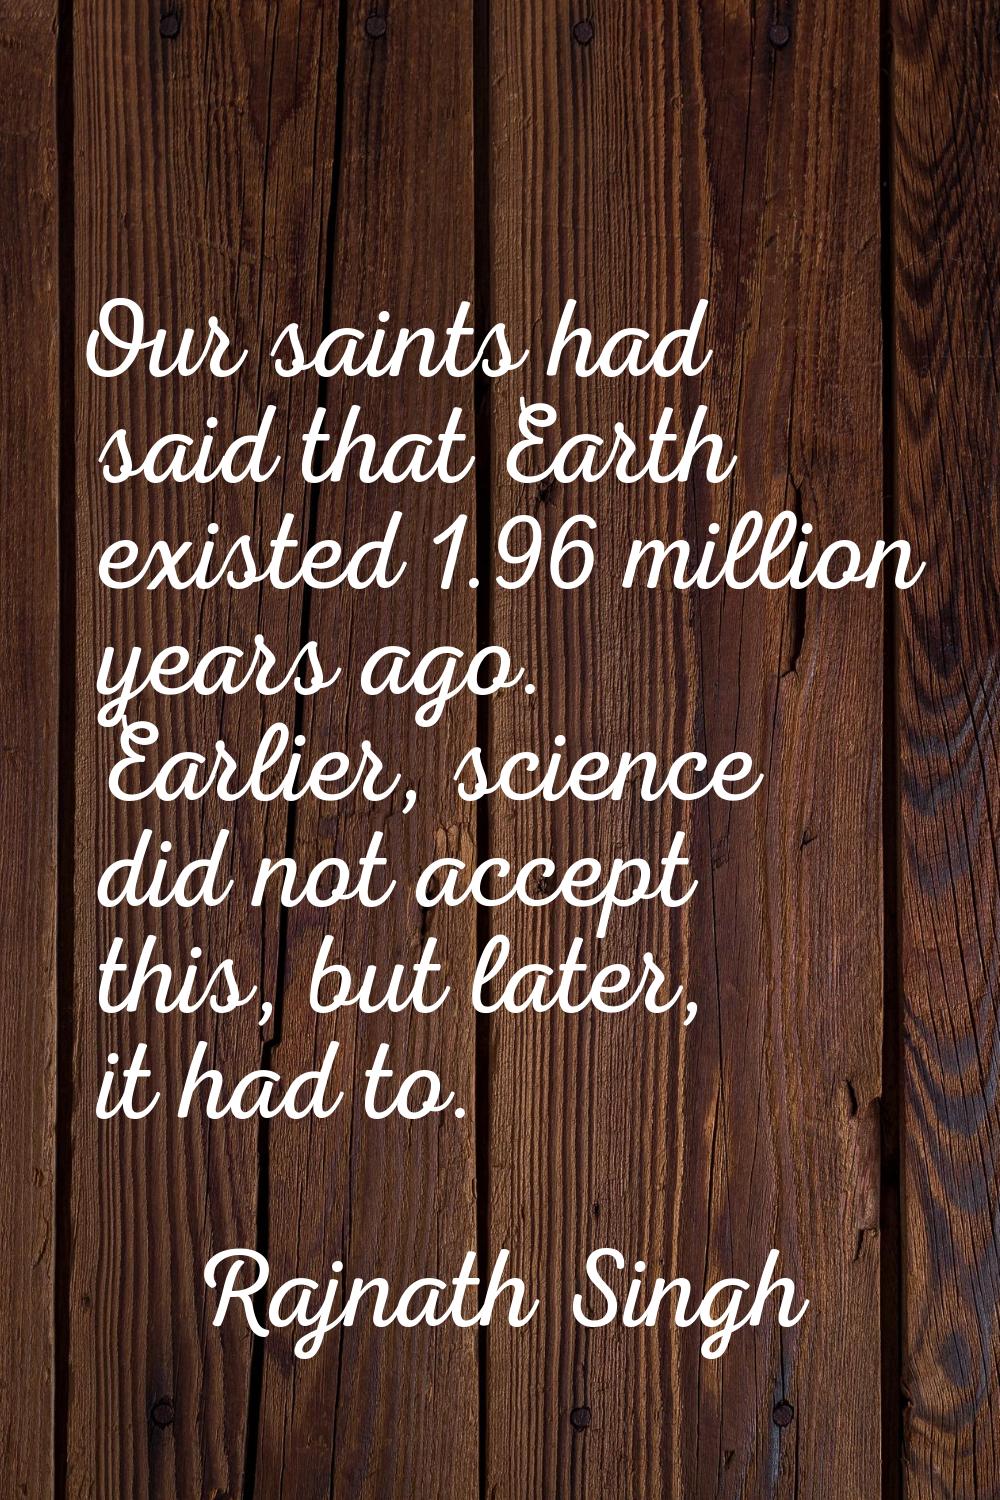 Our saints had said that Earth existed 1.96 million years ago. Earlier, science did not accept this